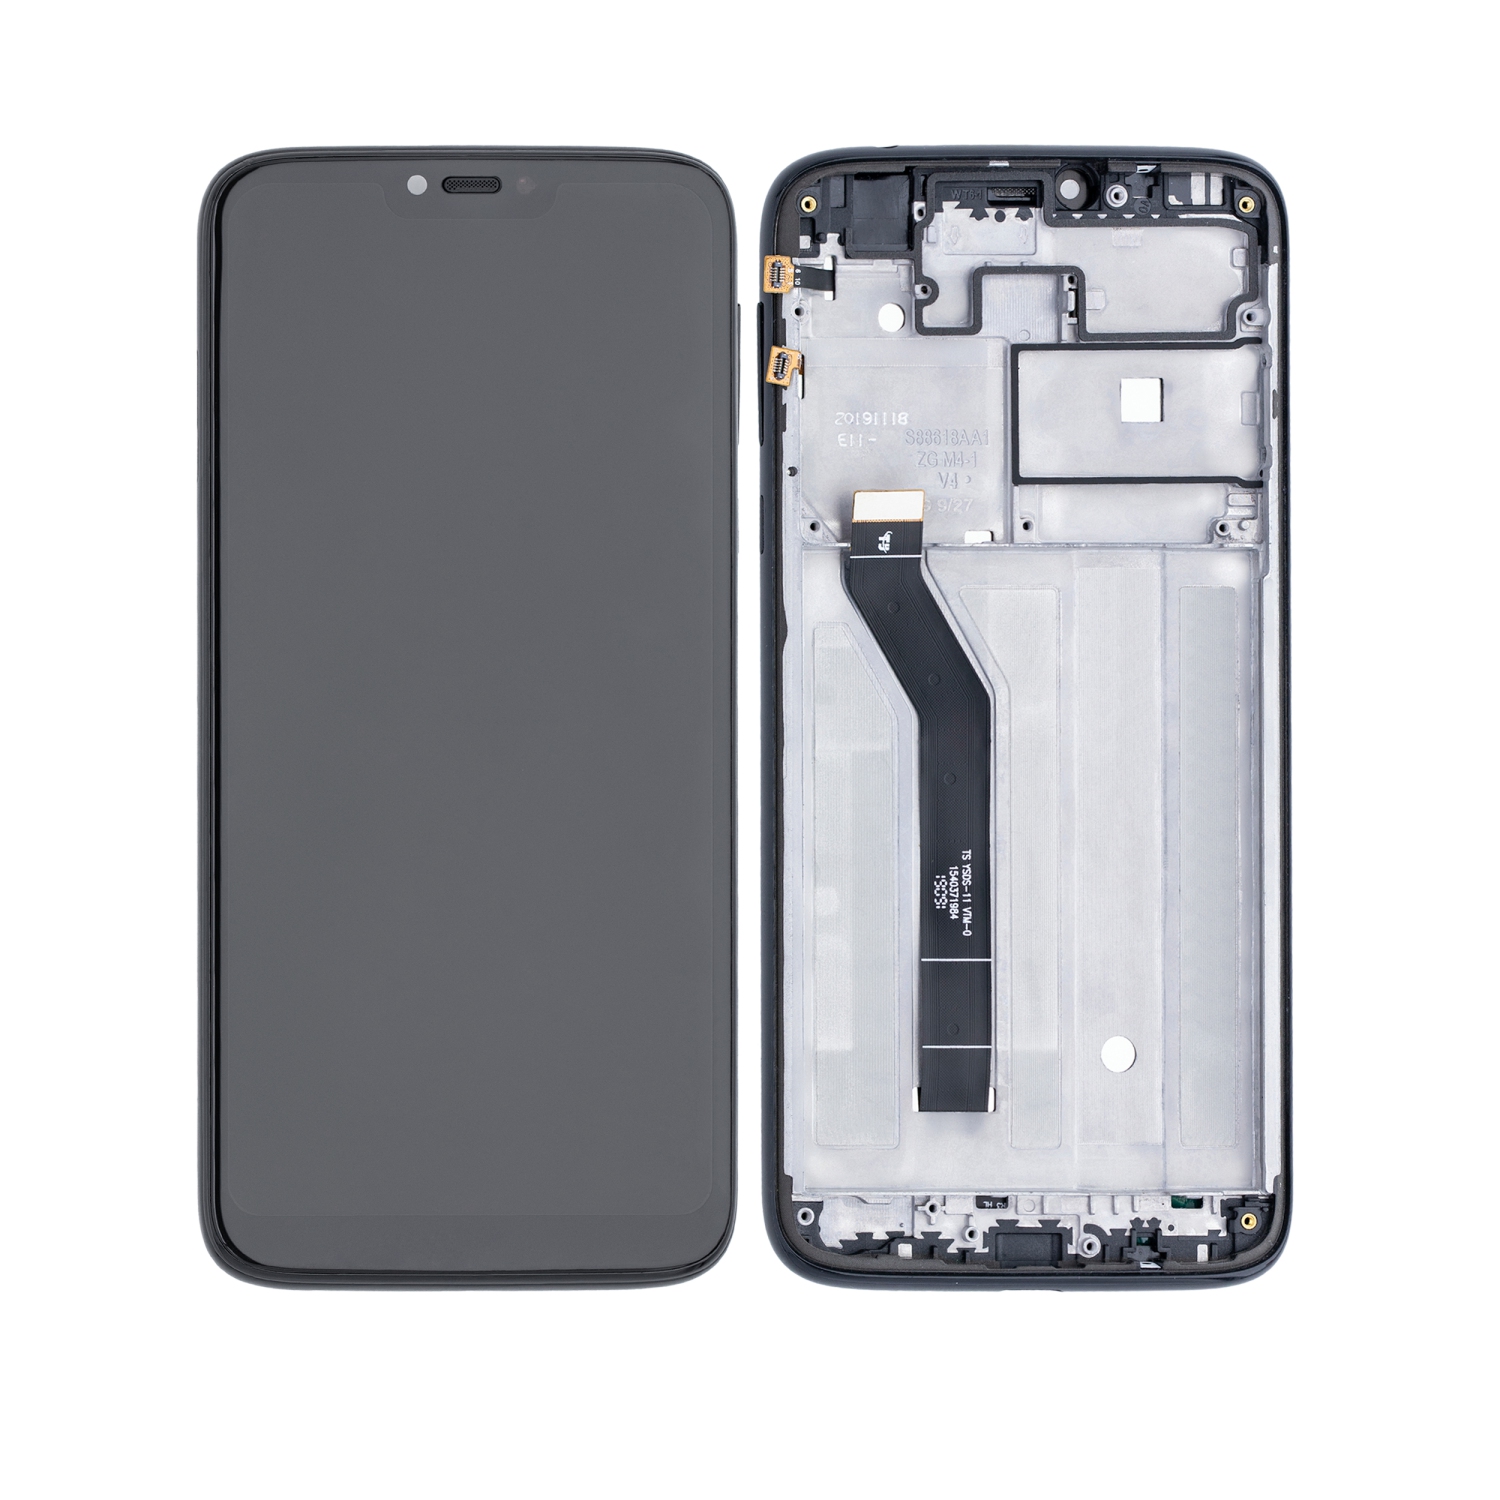 Replacement LCD Assembly With Frame Compatible For Motorola Moto G7 Power (XT1955-1/2/4/7 / 2019) (International Version) (154MM) (Aftermarket Plus) (Ceramic Black)